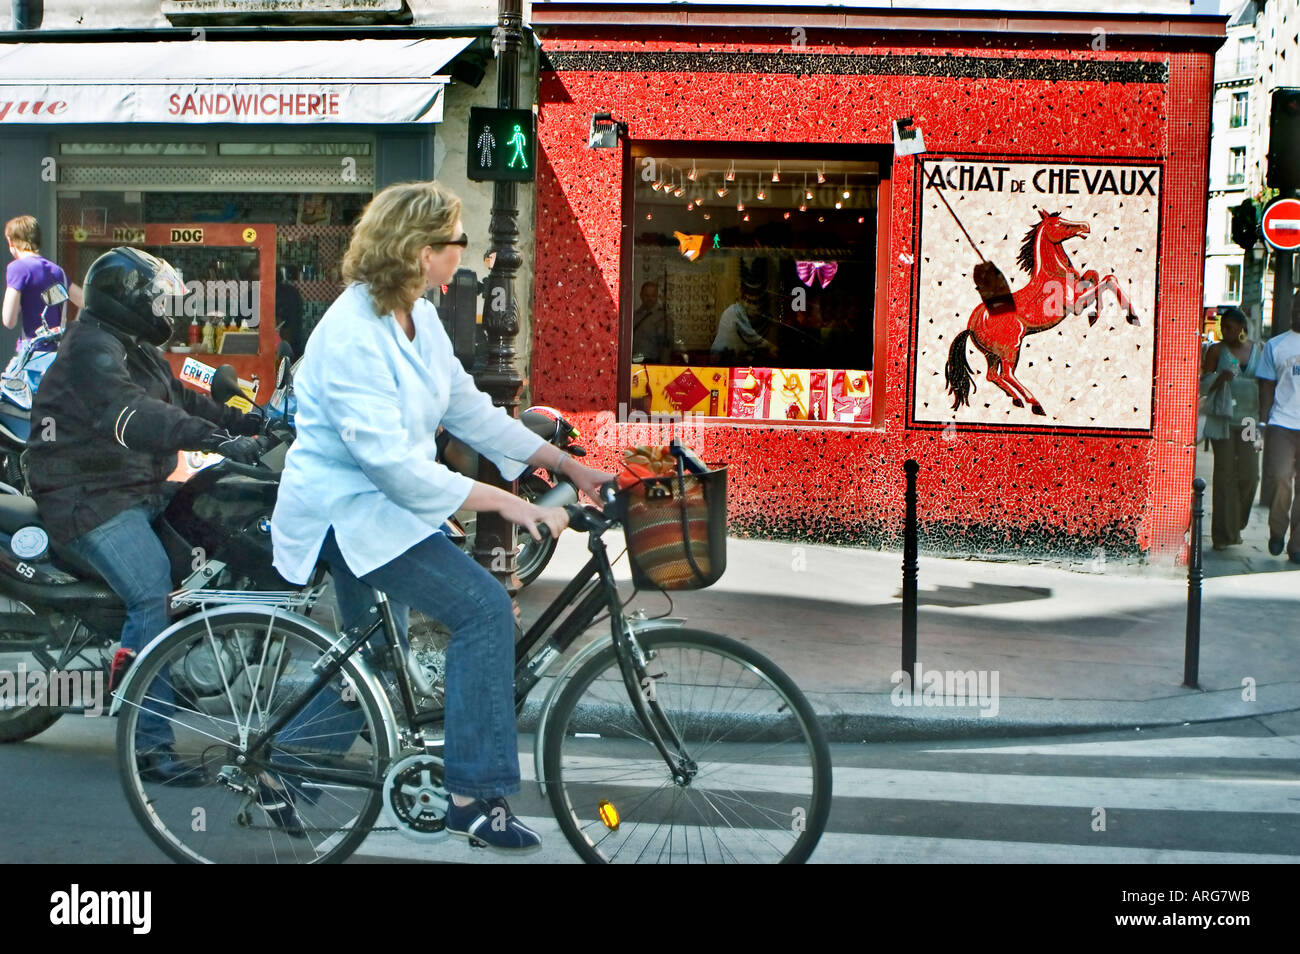 PARIS Marias, France, Street Scene with Horse Butcher Shop Vintage French  Advertising mosaic on Wall Woman on Bicycle, old French storefront Vintage  Stock Photo - Alamy